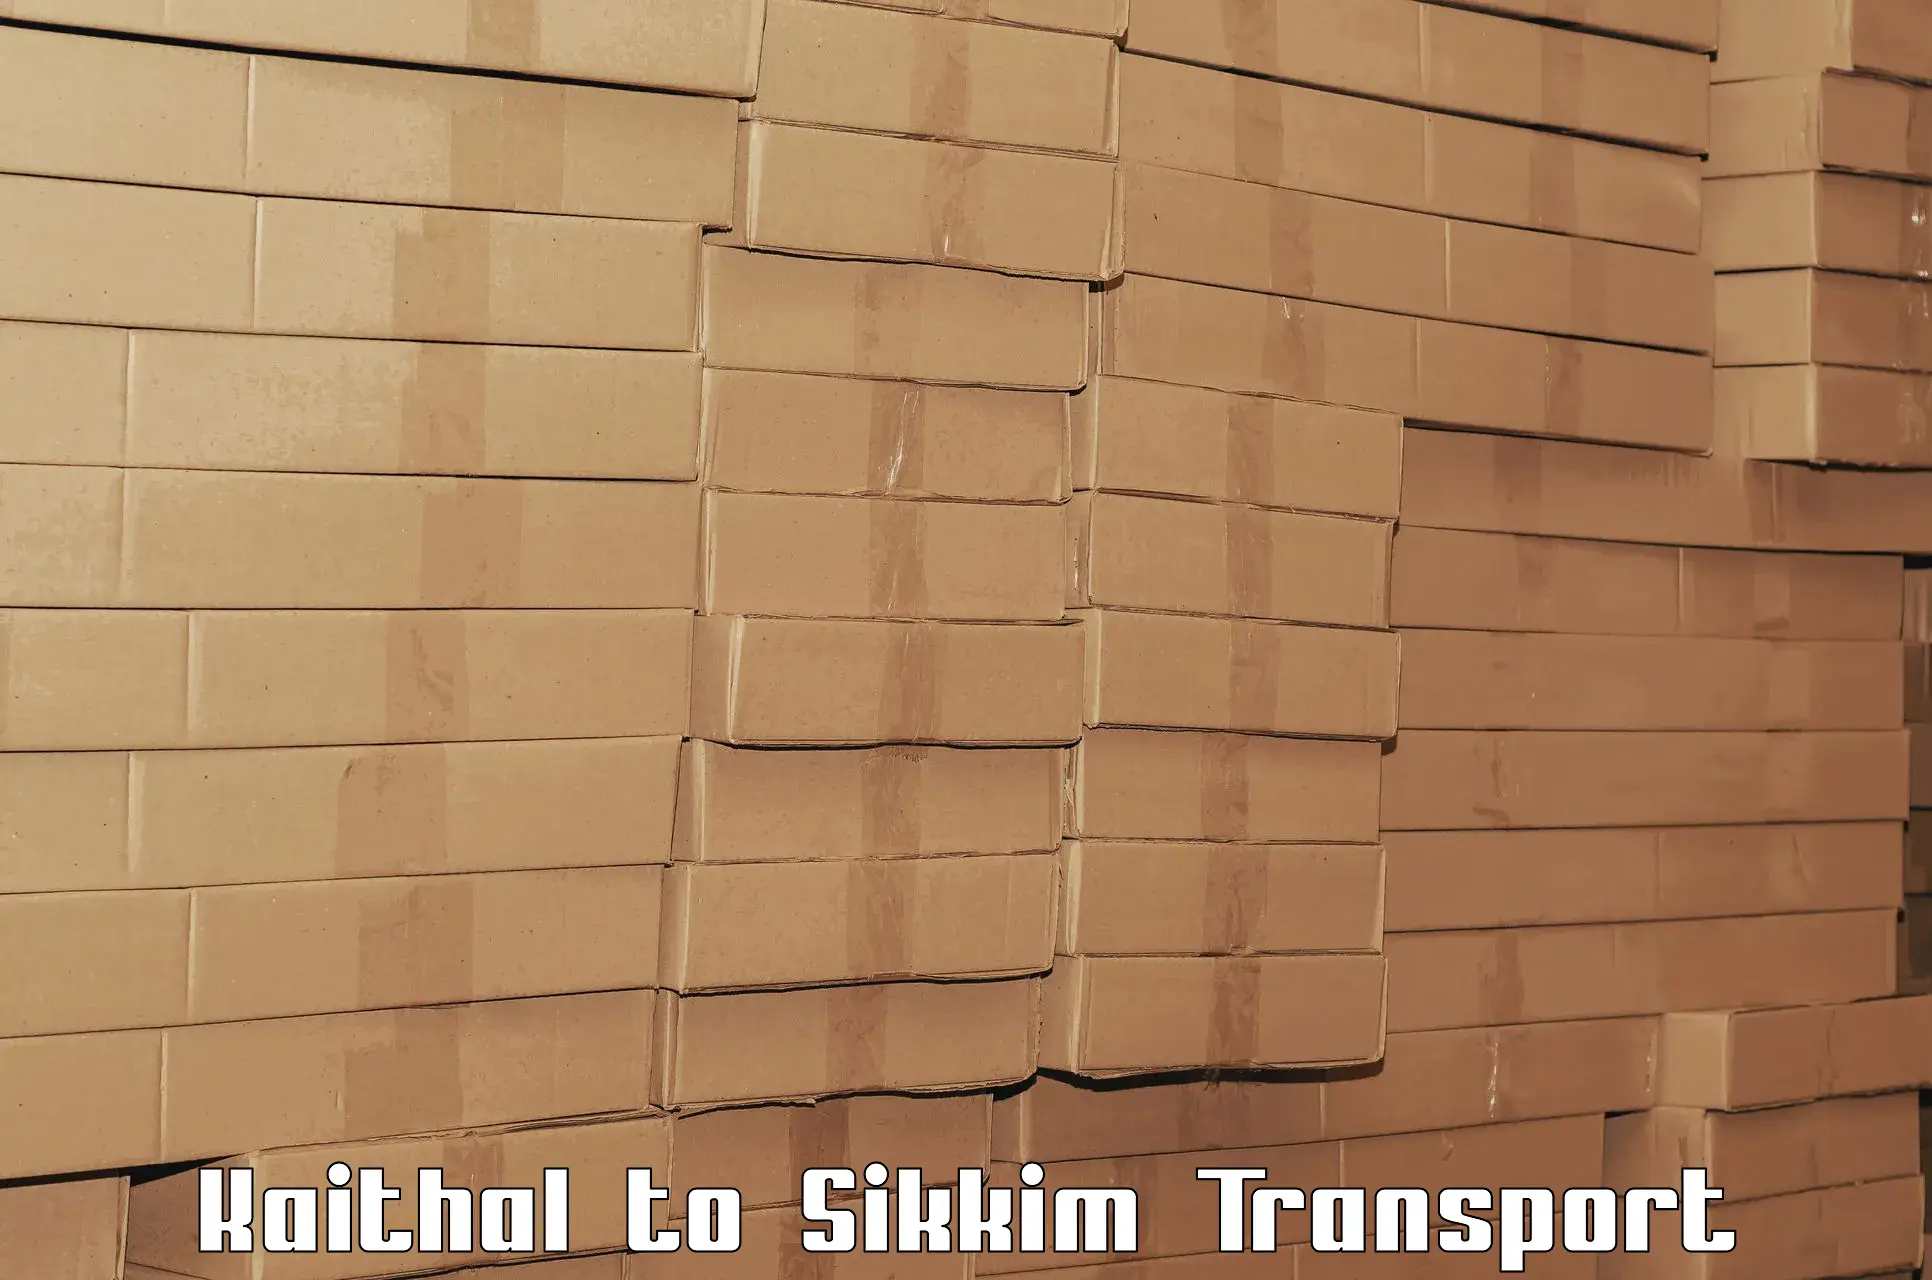 Transport shared services Kaithal to Sikkim